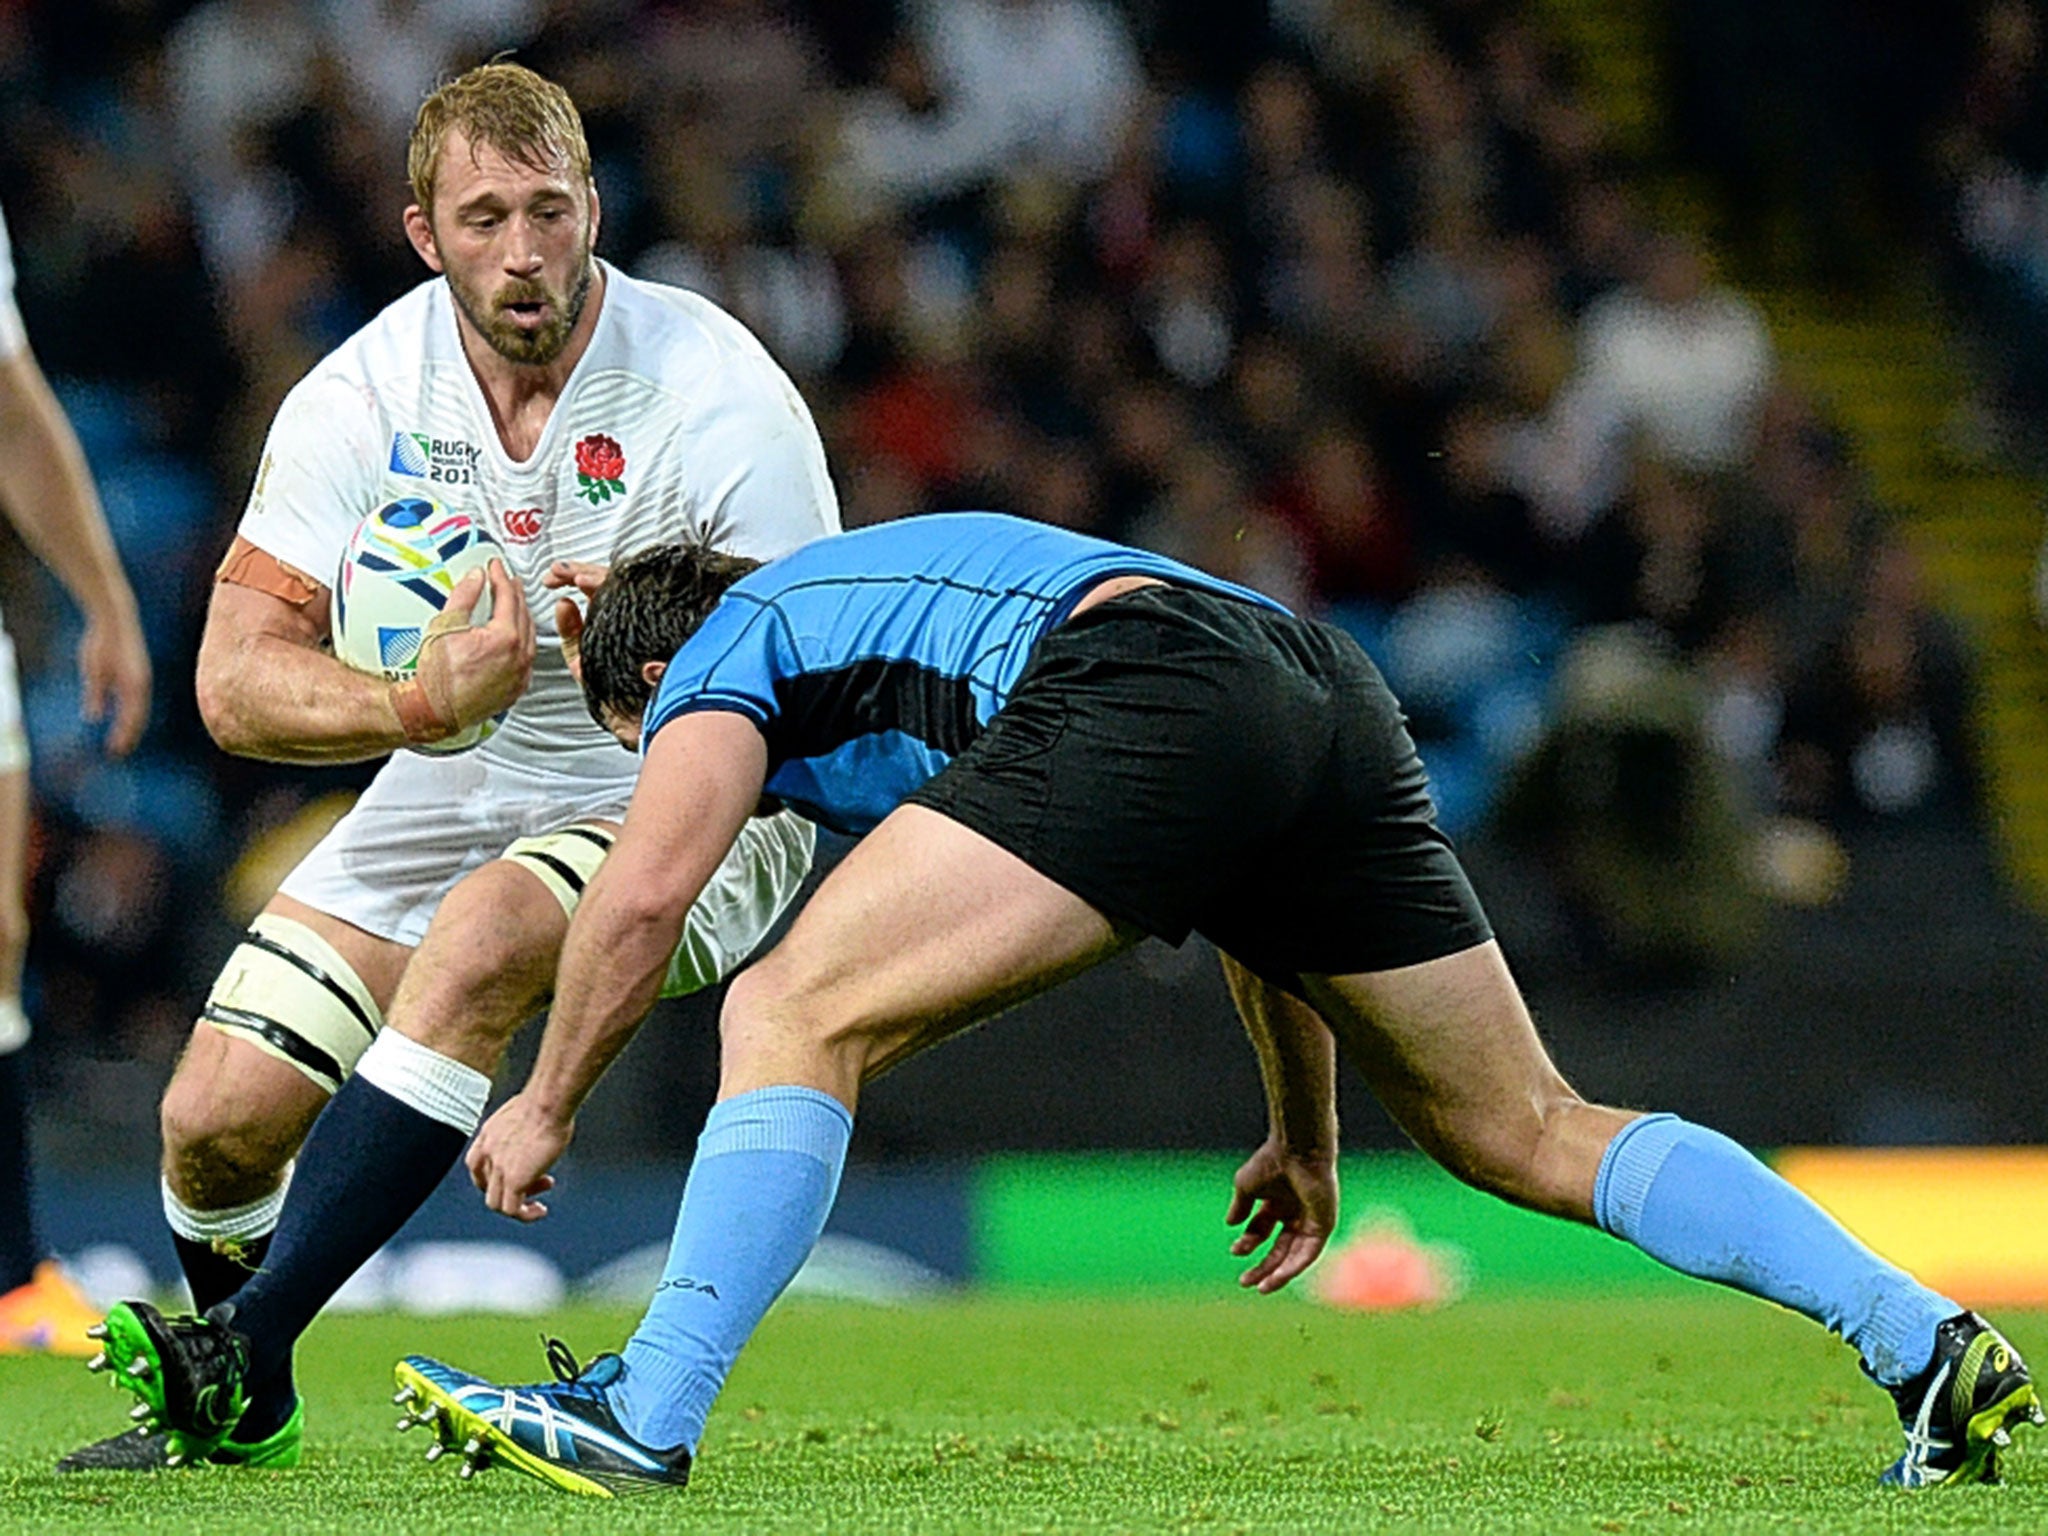 England captain Chris Robshaw is tackled by Matias Beer